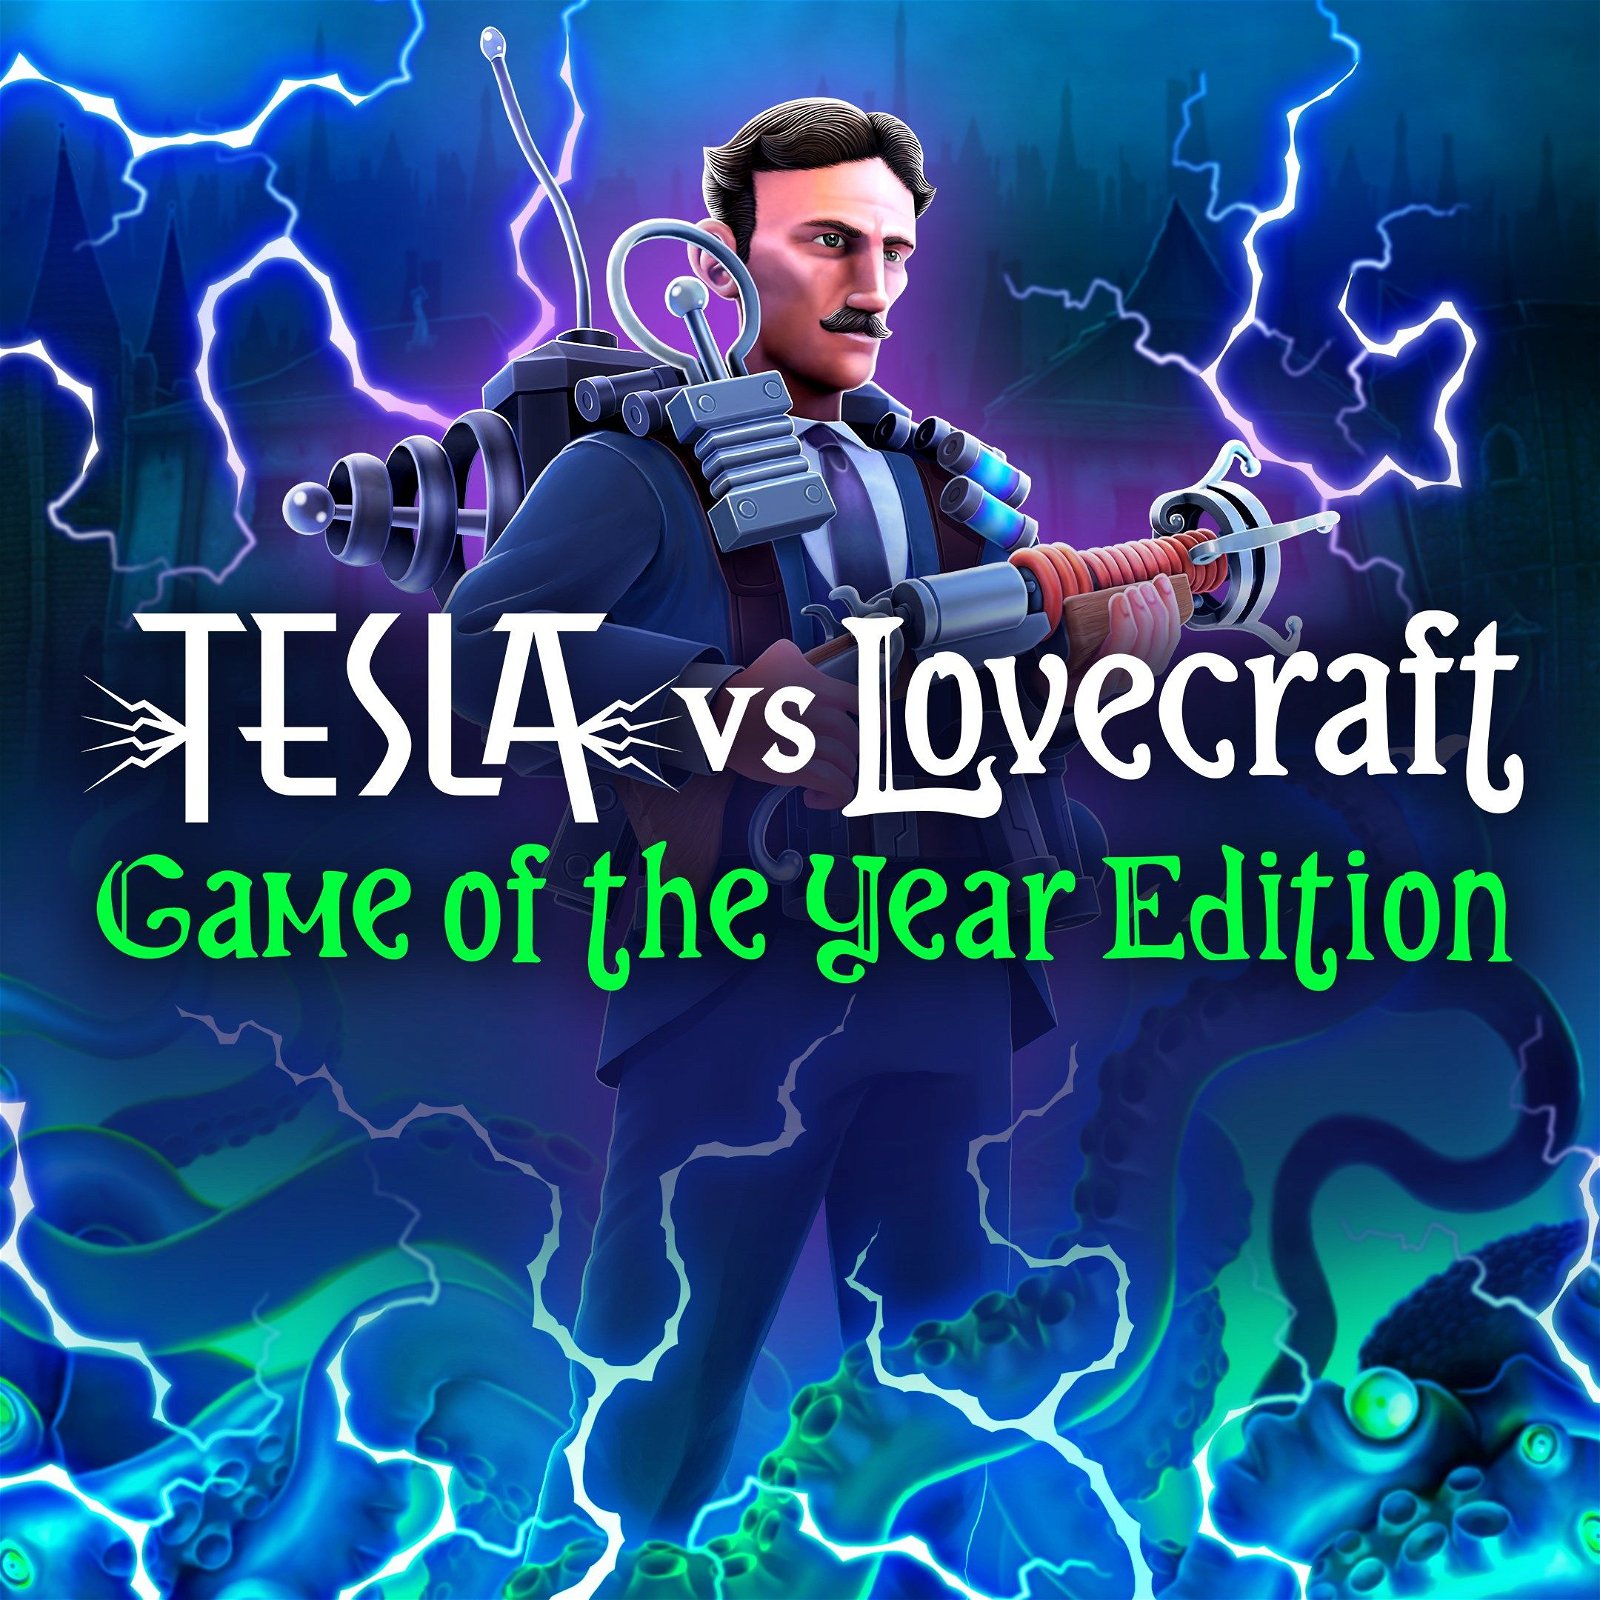 Image of Tesla vs Lovecraft Game of the Year Edition